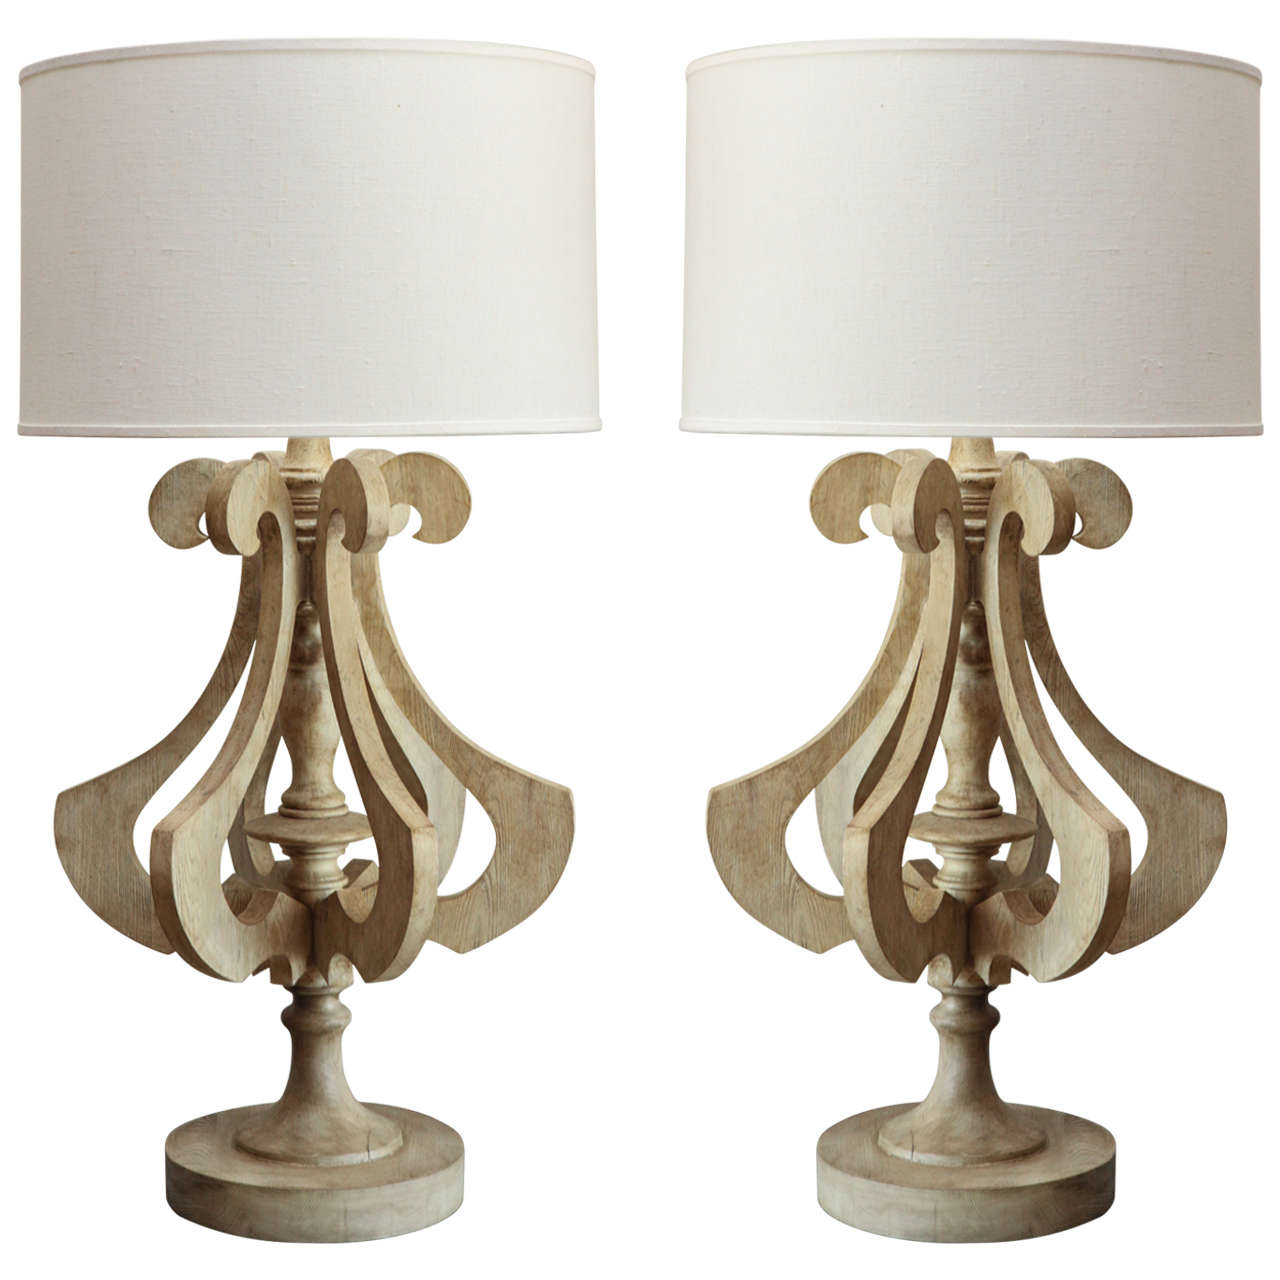 Pair of Monumental Turned Wood Architectural Table Lamps